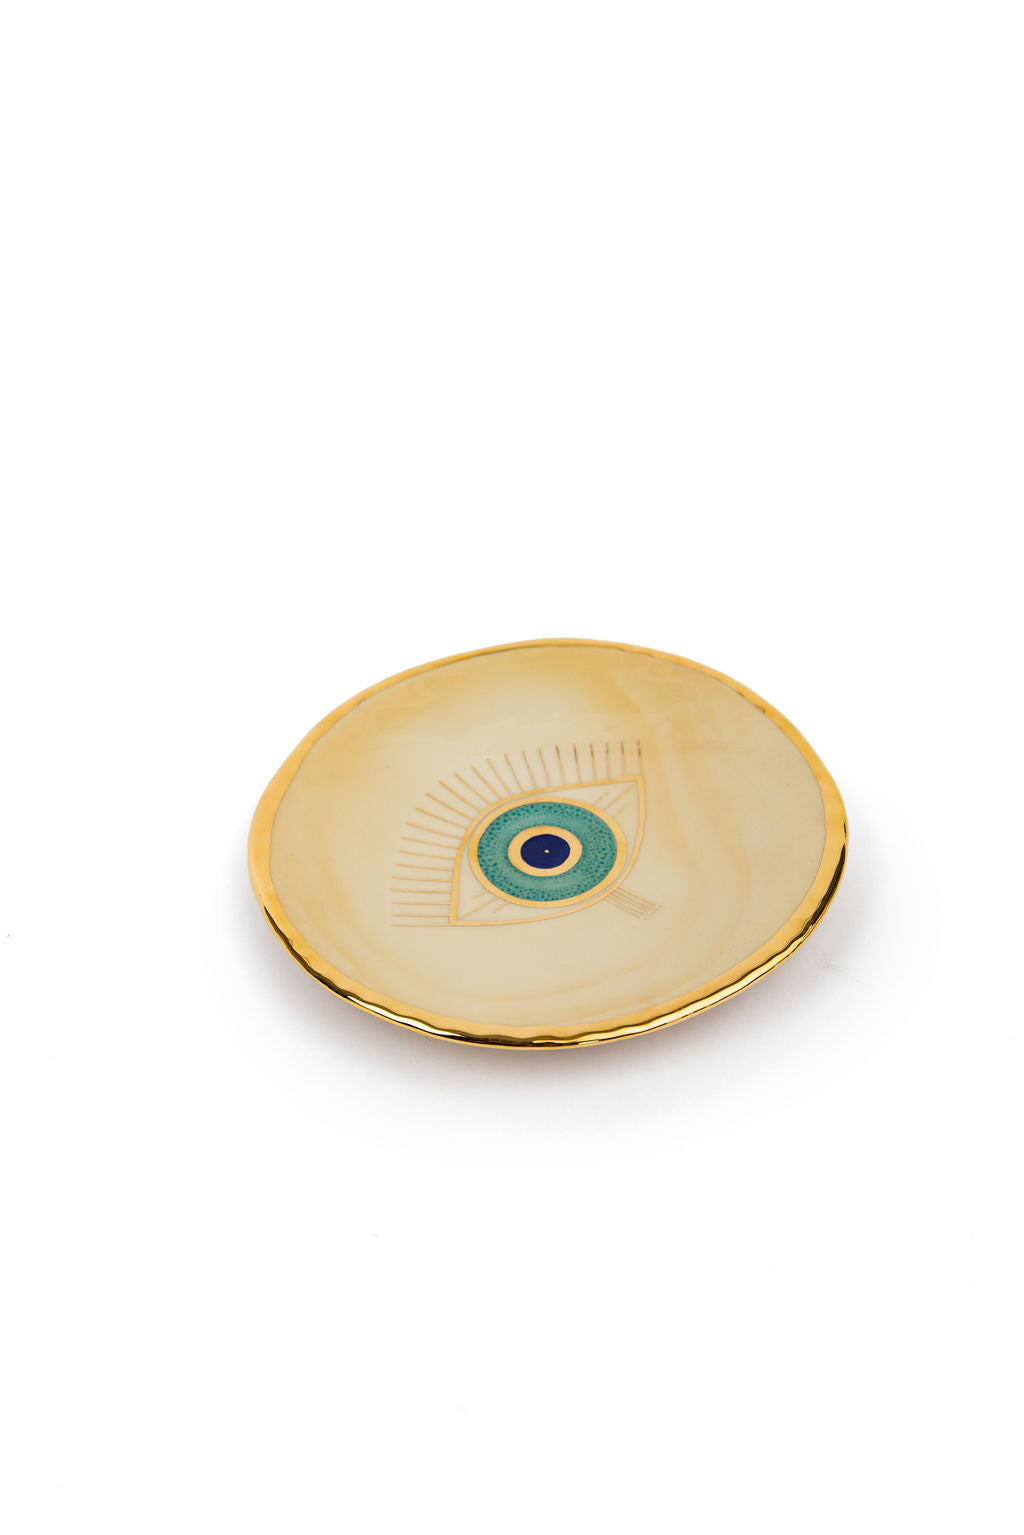 Nazar ceramic plate-beige and gold with evil eye